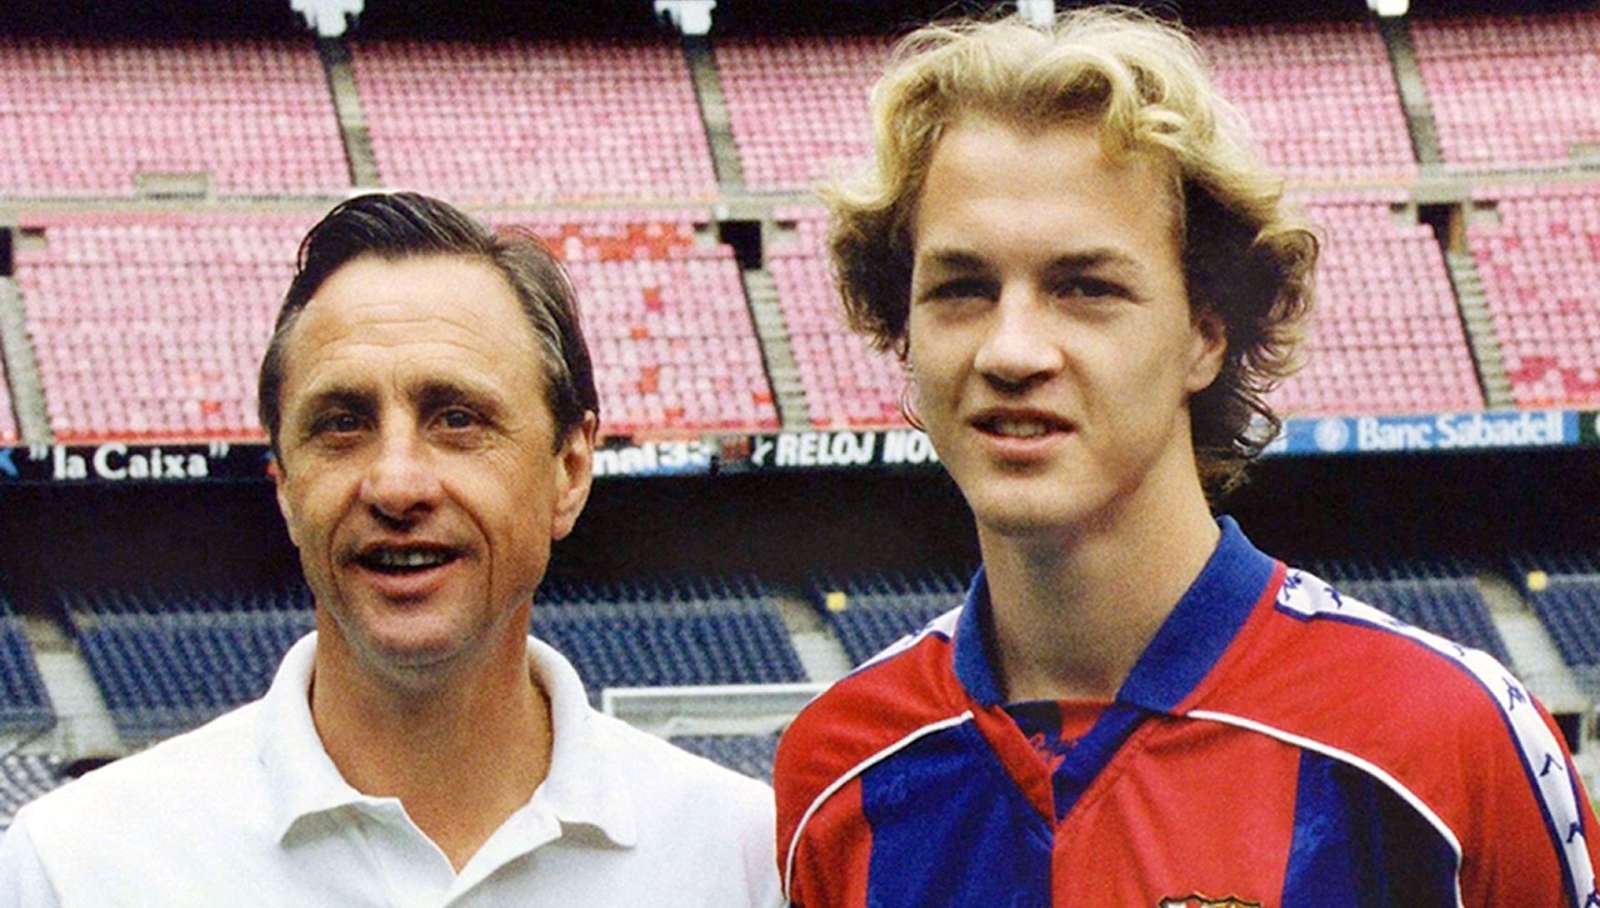 Maldini, Cruyff, Kluivert & the most famous father-sons in football - Bóng Đá